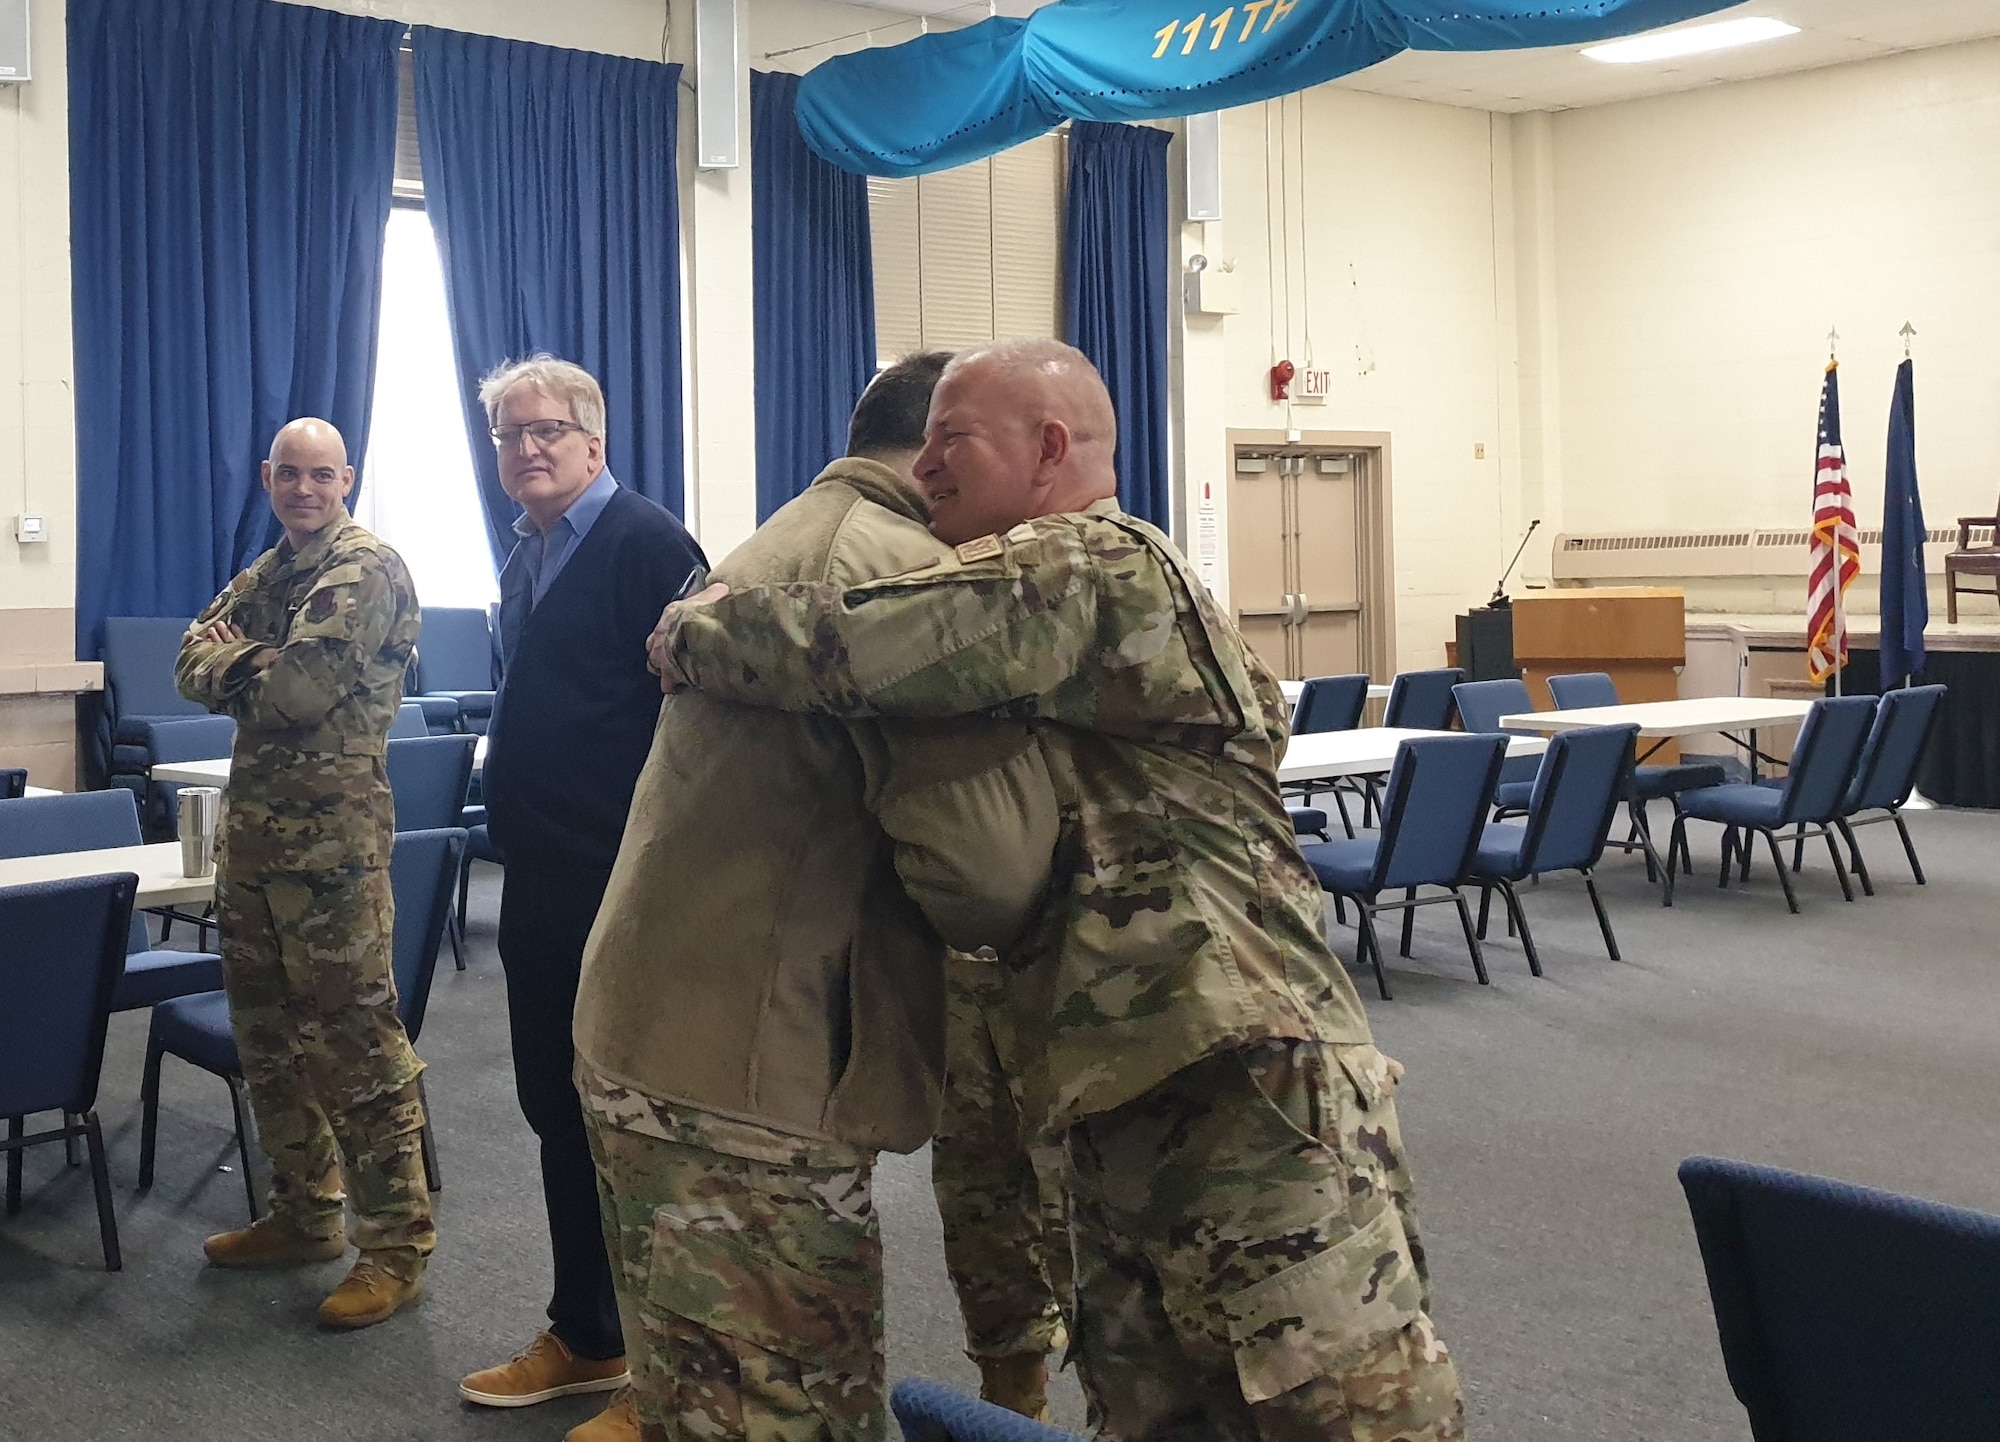 Two men in military uniforms greet each other with a hug.